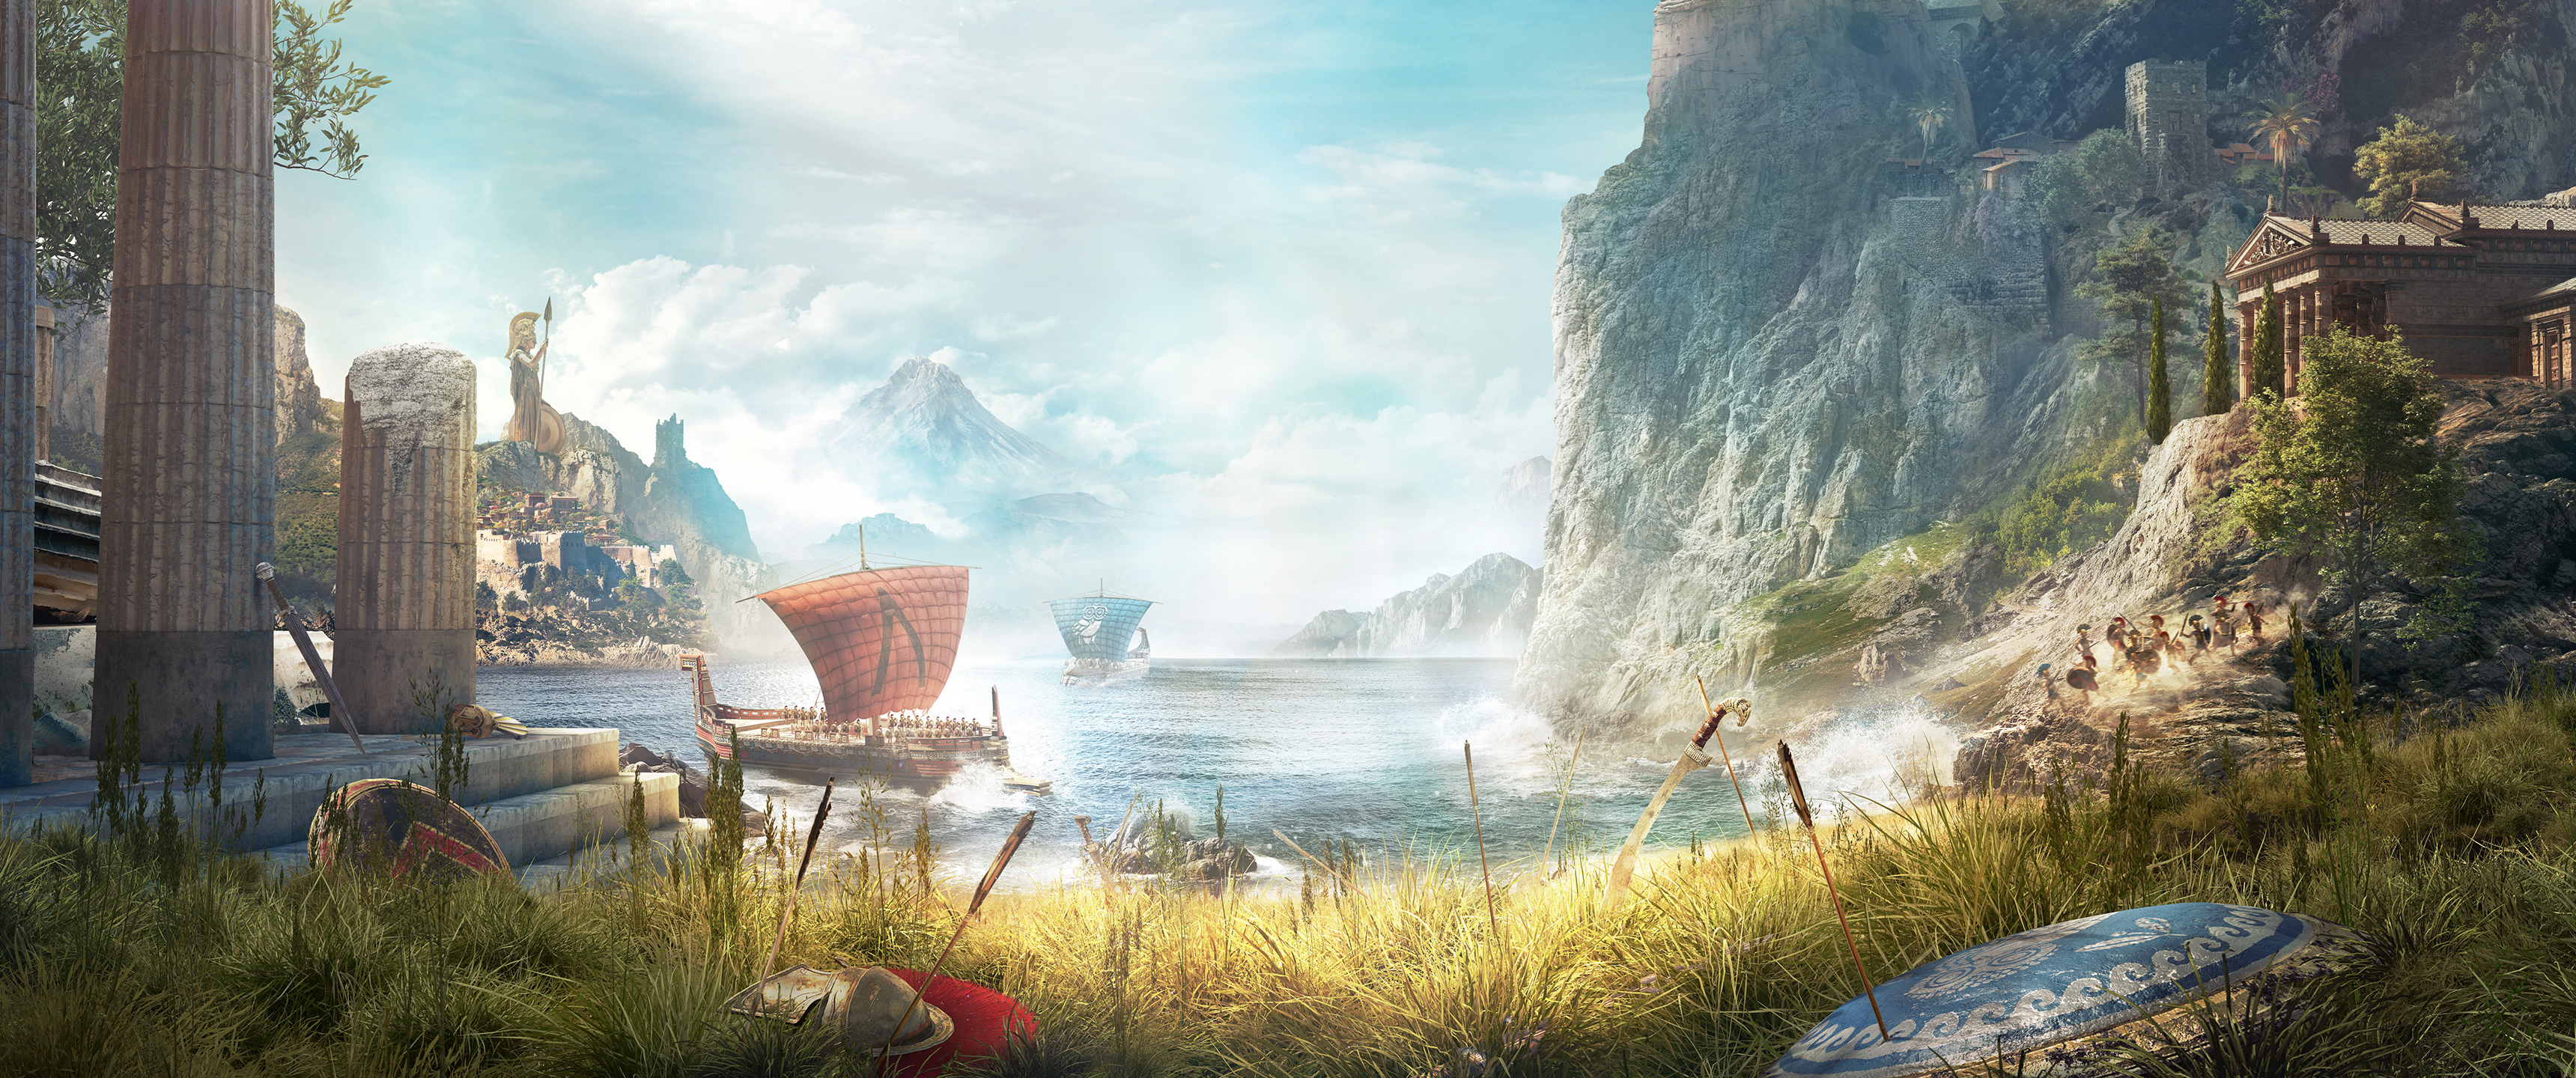 General 3440x1440 ultrawide video games video game art Assassin's Creed Greece ancient greece mythology Assassin's Creed: Odyssey